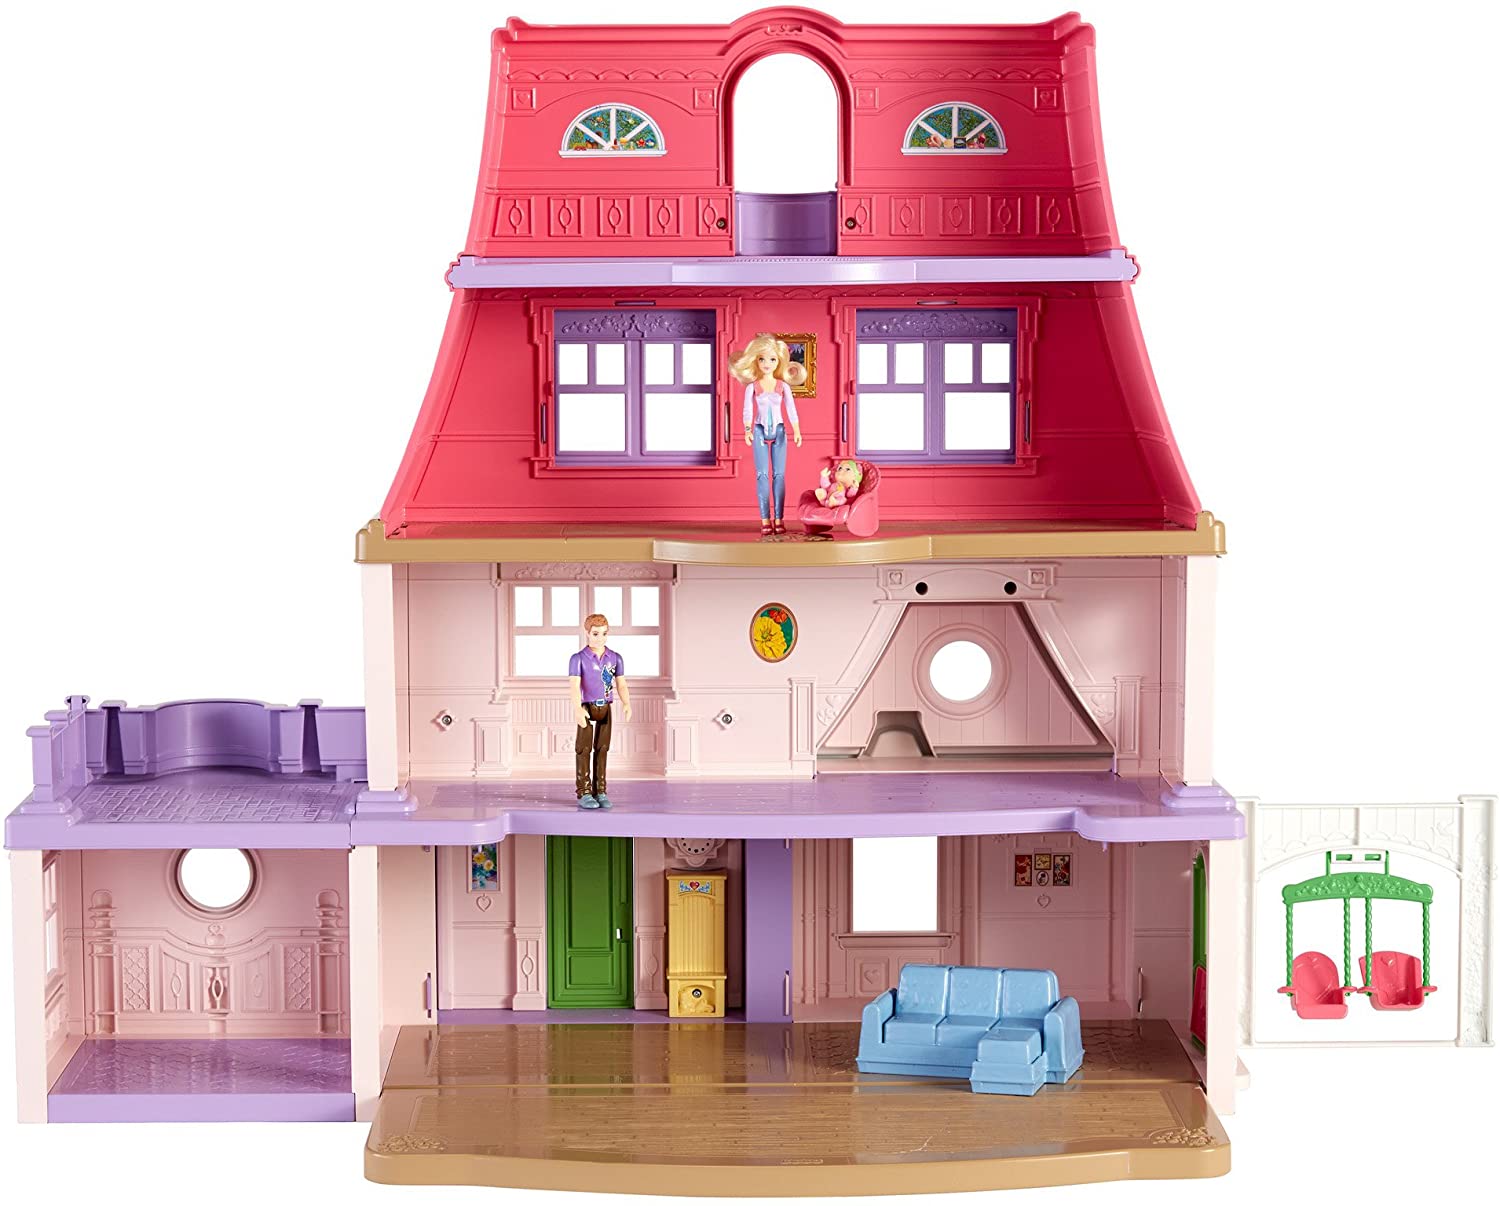 9 Best Fisher Price Dollhouse Reviews of 2022 9